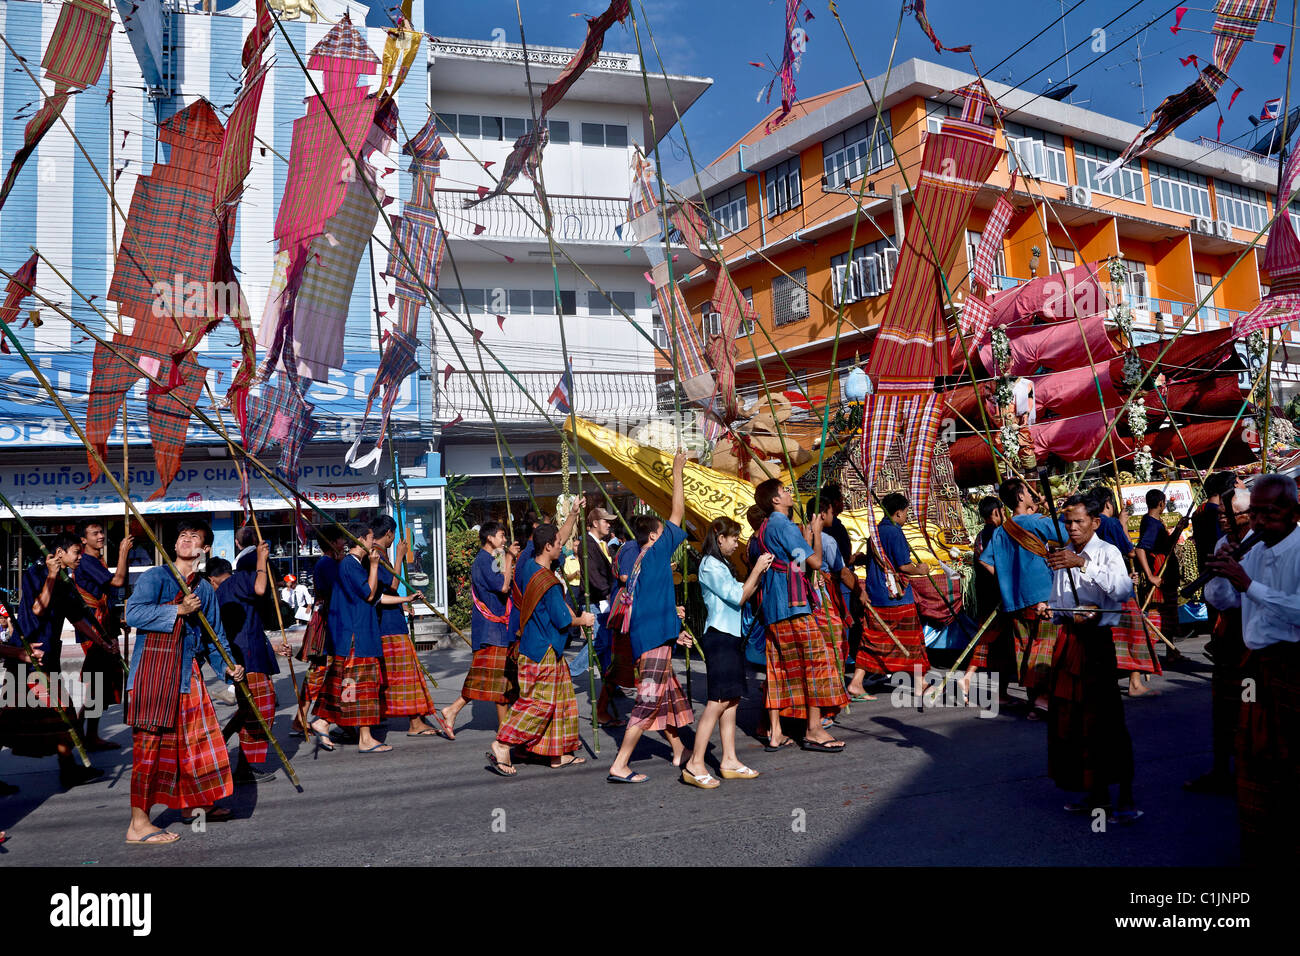 Thailand street parade. Colorful flags and banners at the annual street festival and parade Surin Thailand S. E. Asia Stock Photo